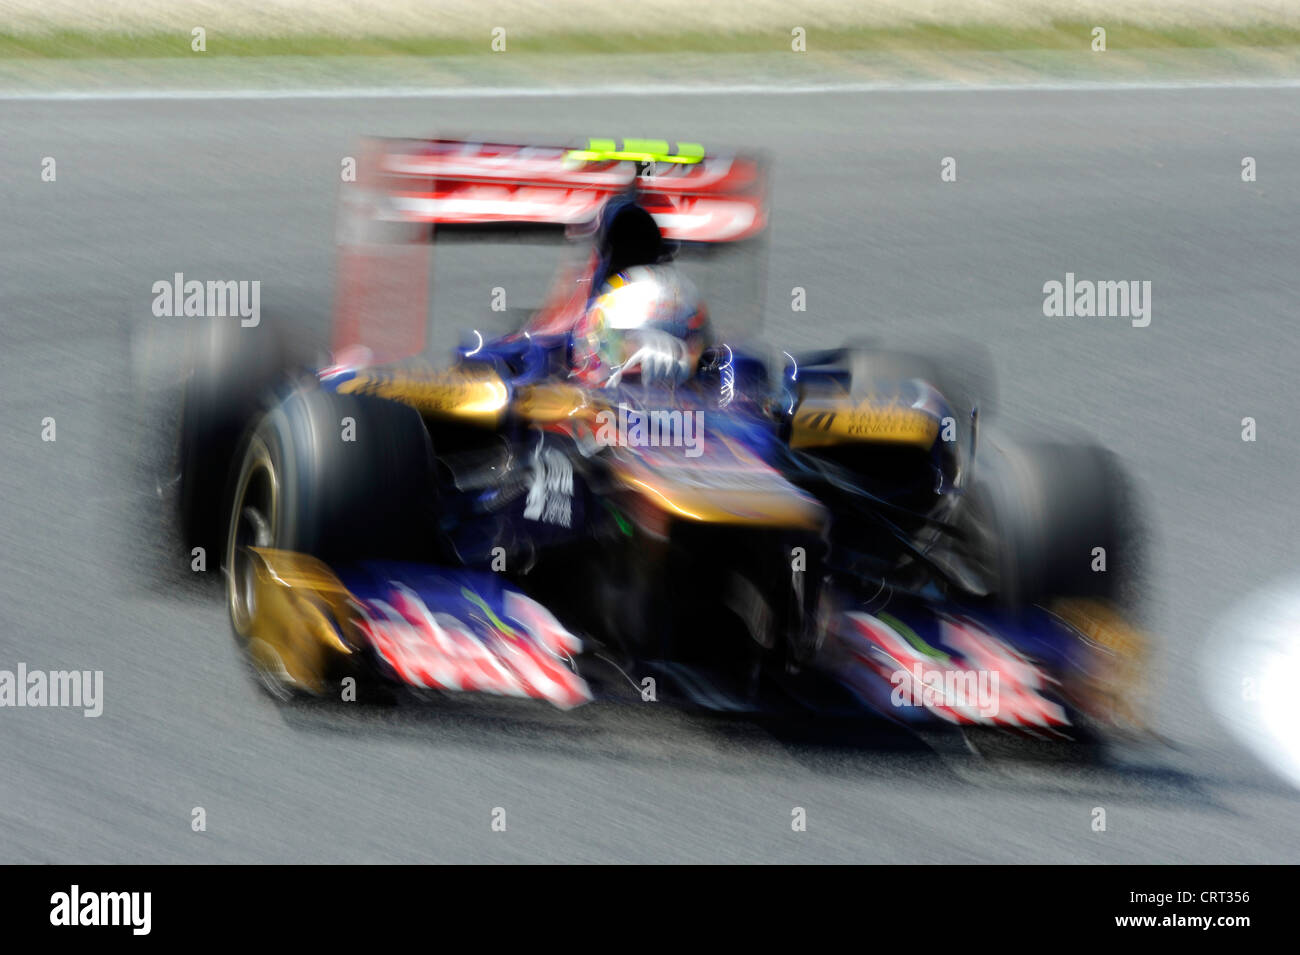 blurred Formula One race car during free practice for the Spanish Formula One GP in Montmelo, Spain Stock Photo